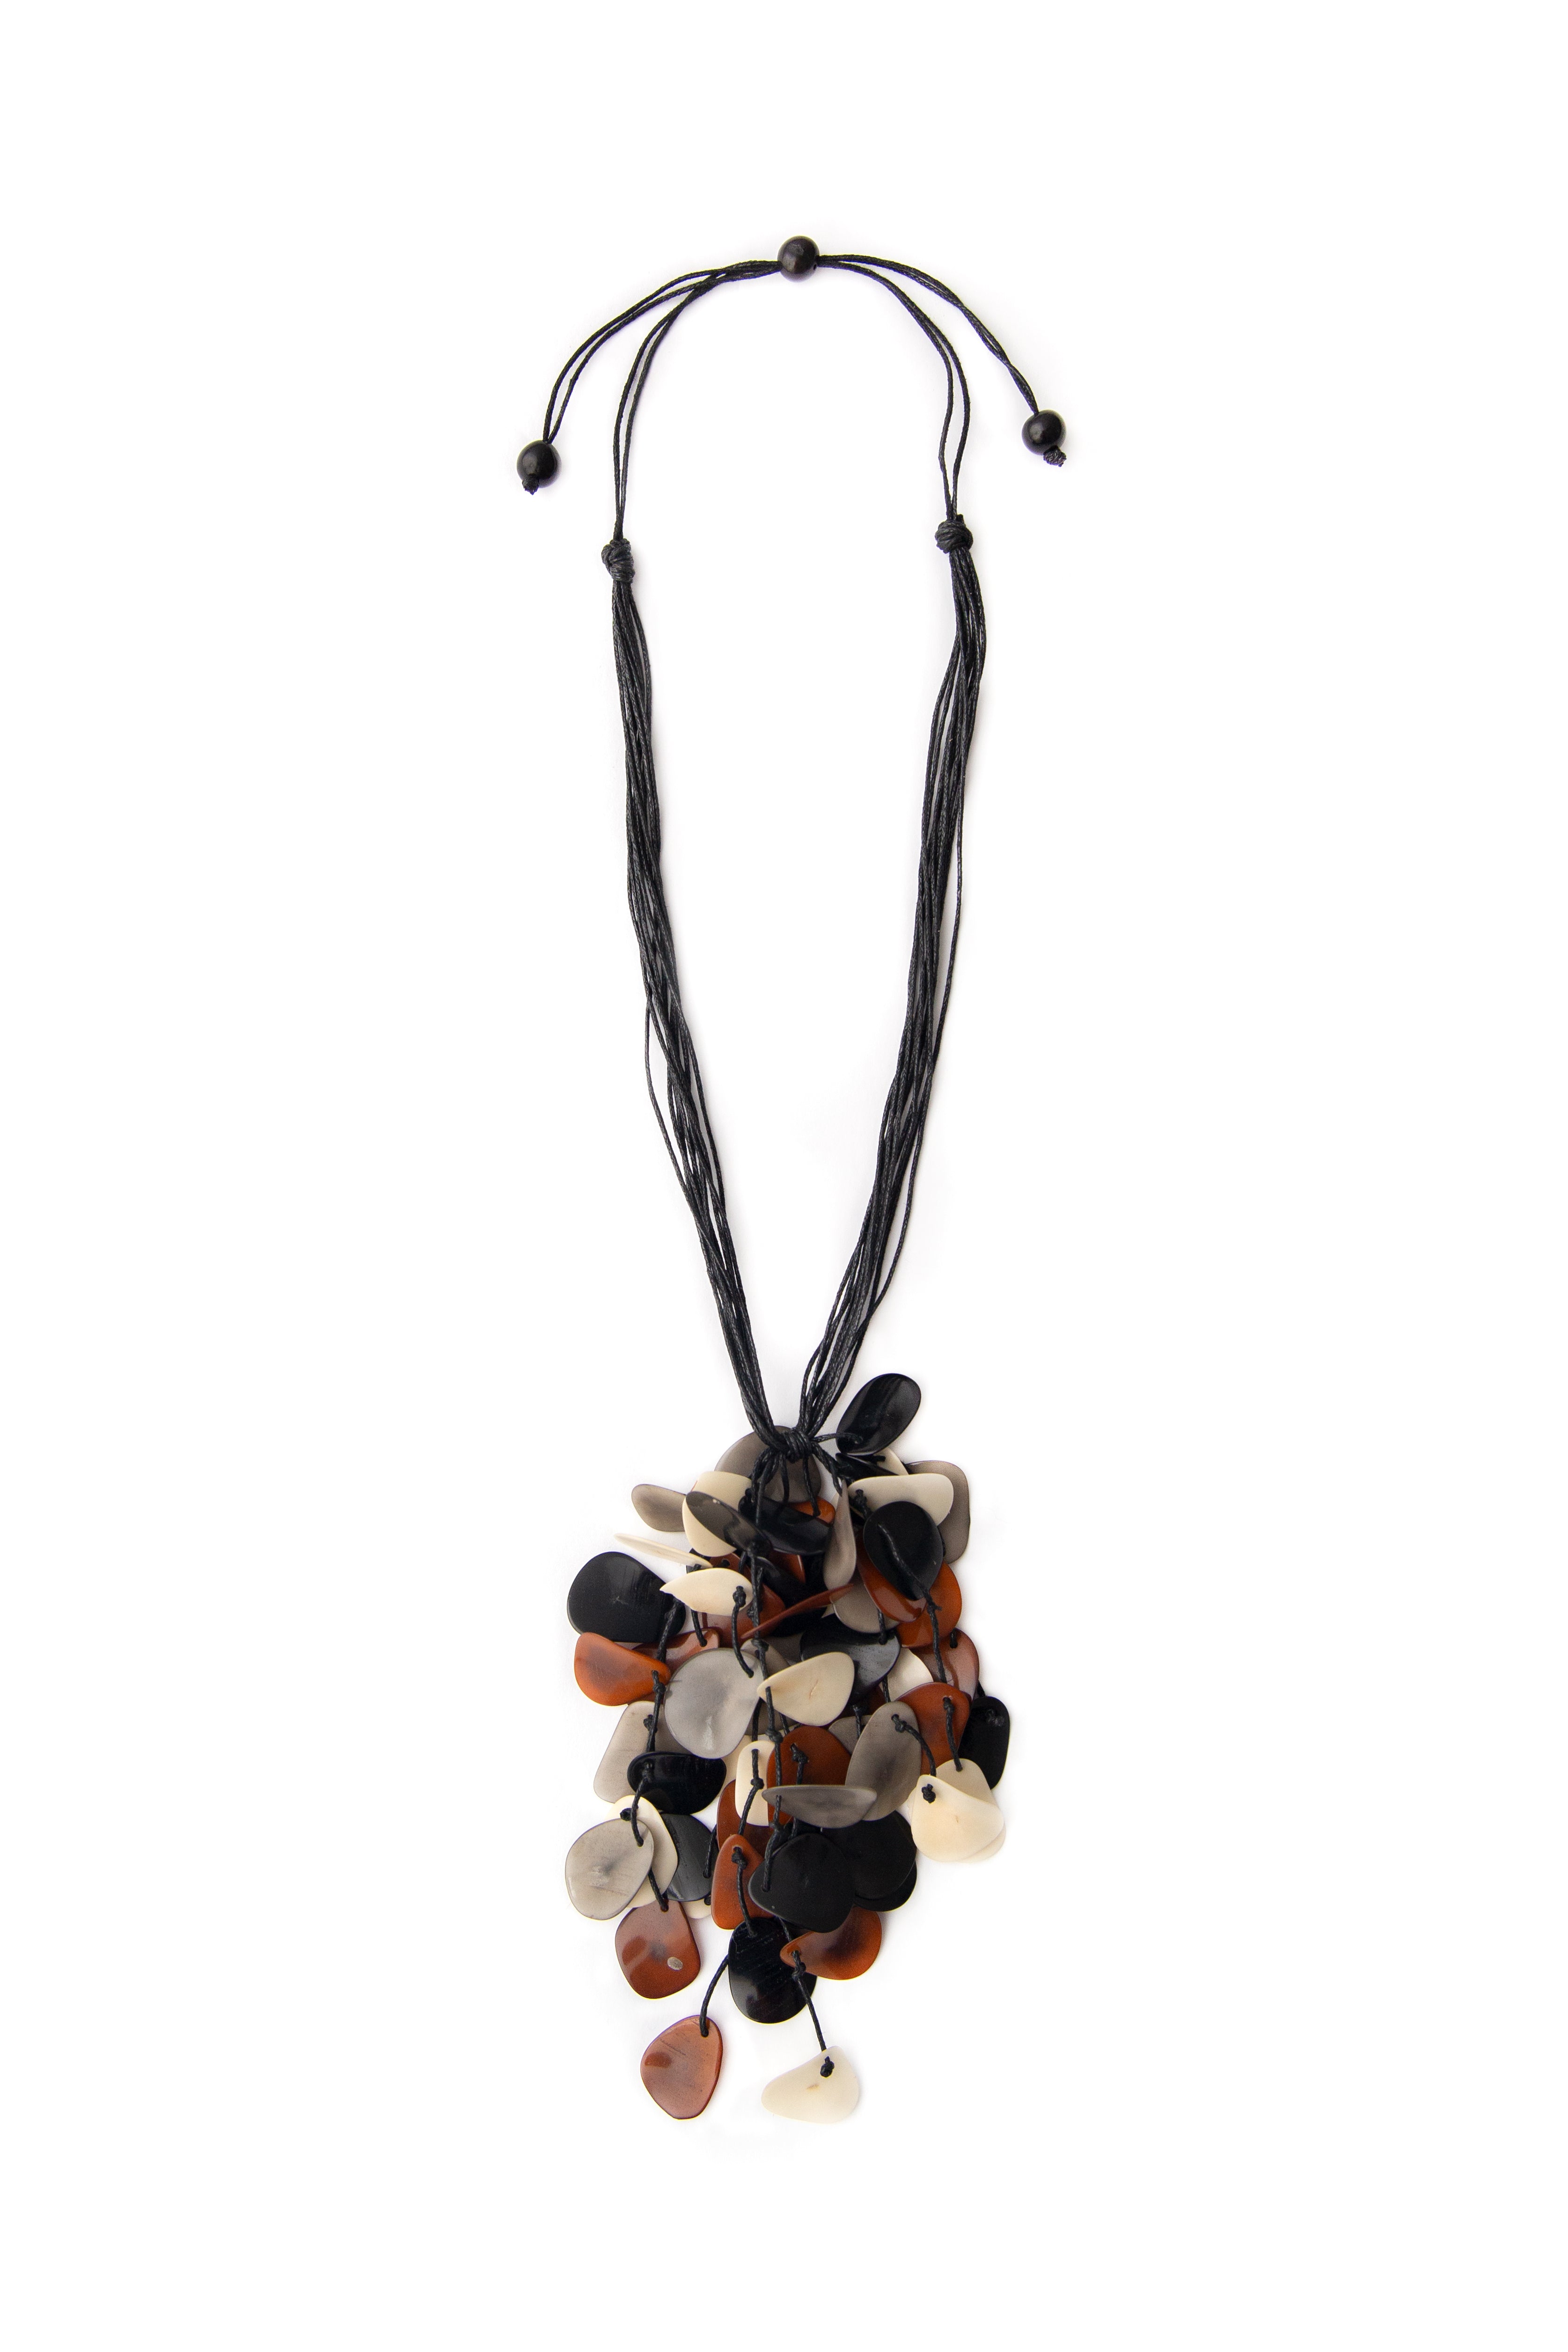 Organic Tagua Jewelry (SC1722) Carter Necklace - A multi-coulor cluster of sliced tagua nut beads on an adjustable cord